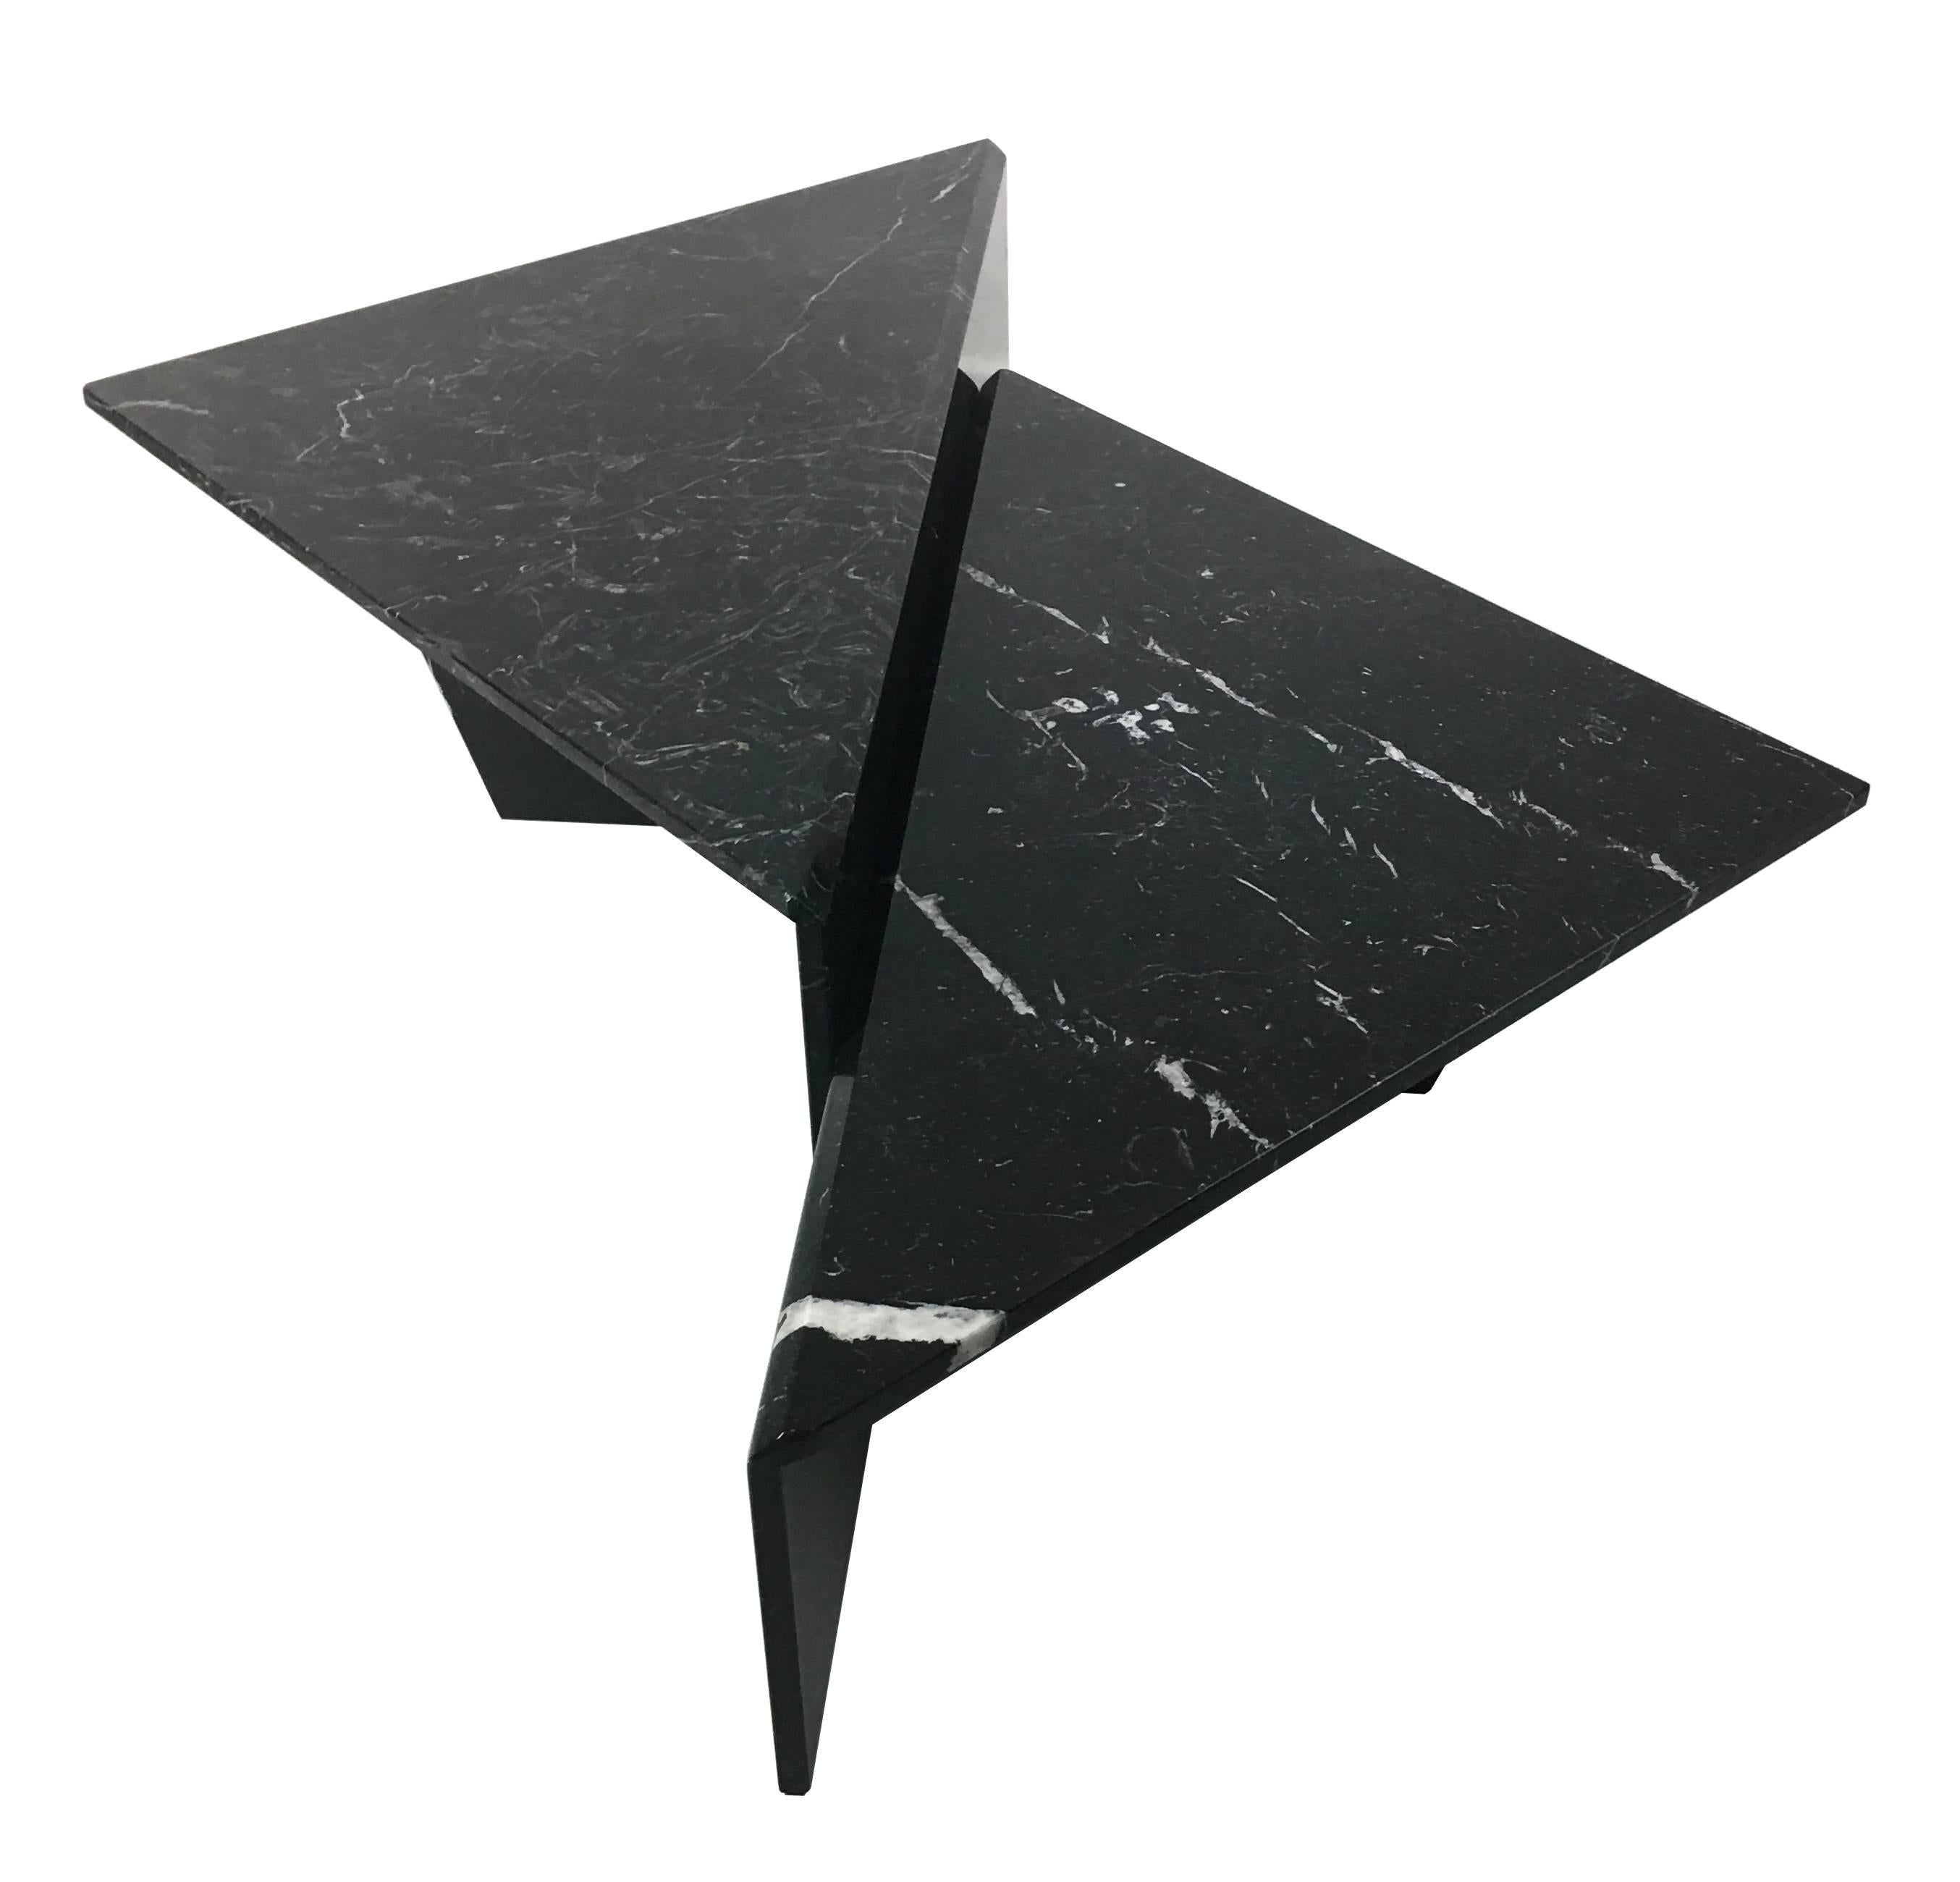 Fantastic sculptural two-piece, bi-level cocktail table in beautifully figured Nero Marquina marble. The table can be configured in a number of ways to compliment your seating with a super-chic 1970s vibe. All of the corners and joints are mitered